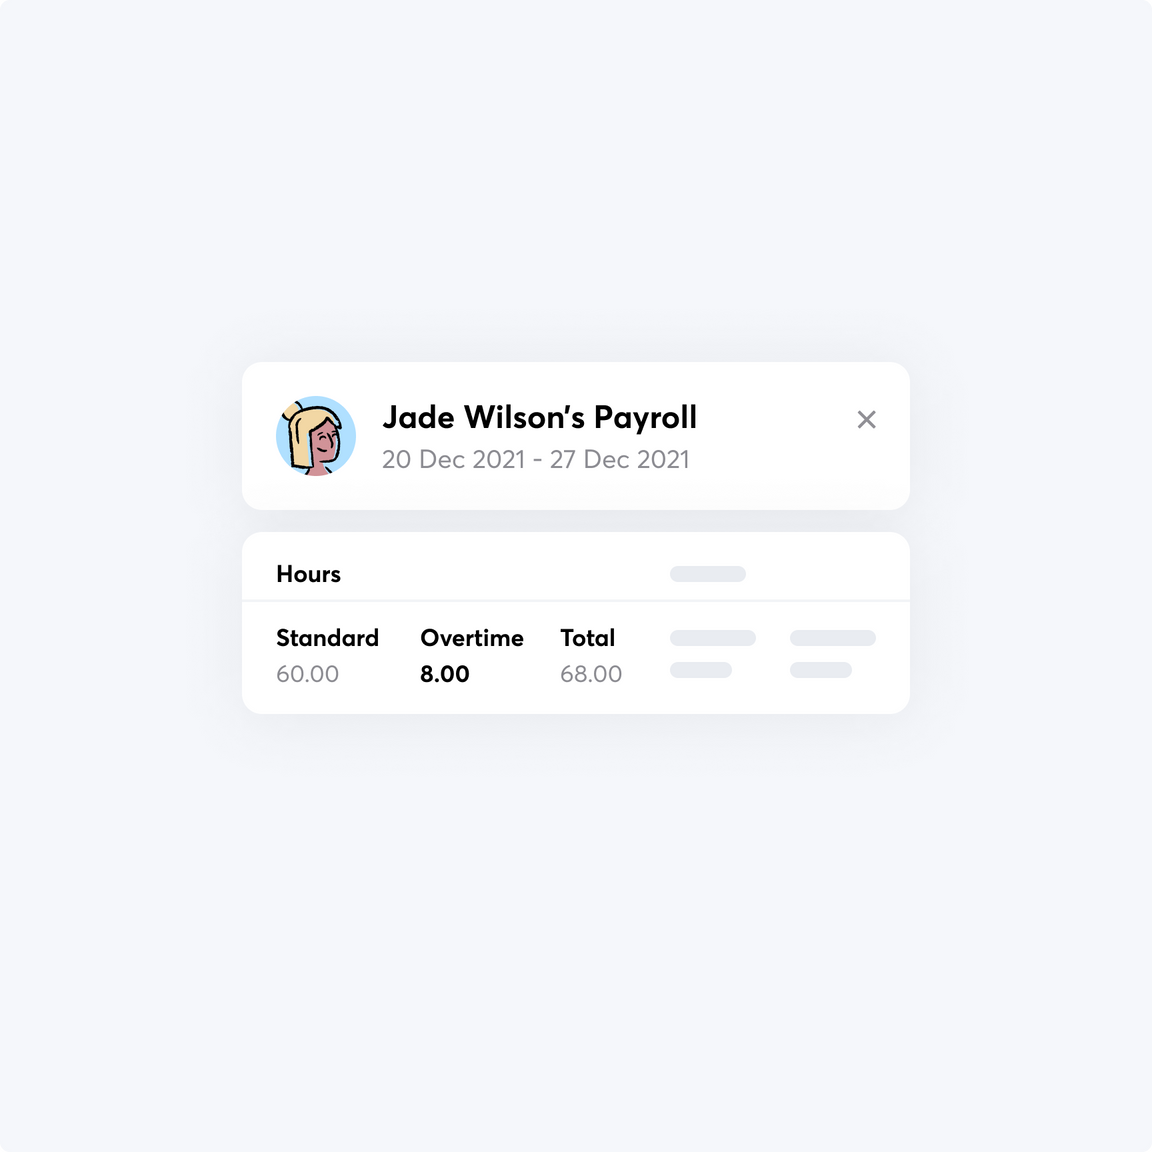 An employee's payroll record in RotaCloud with standard hours, overtime, and total.